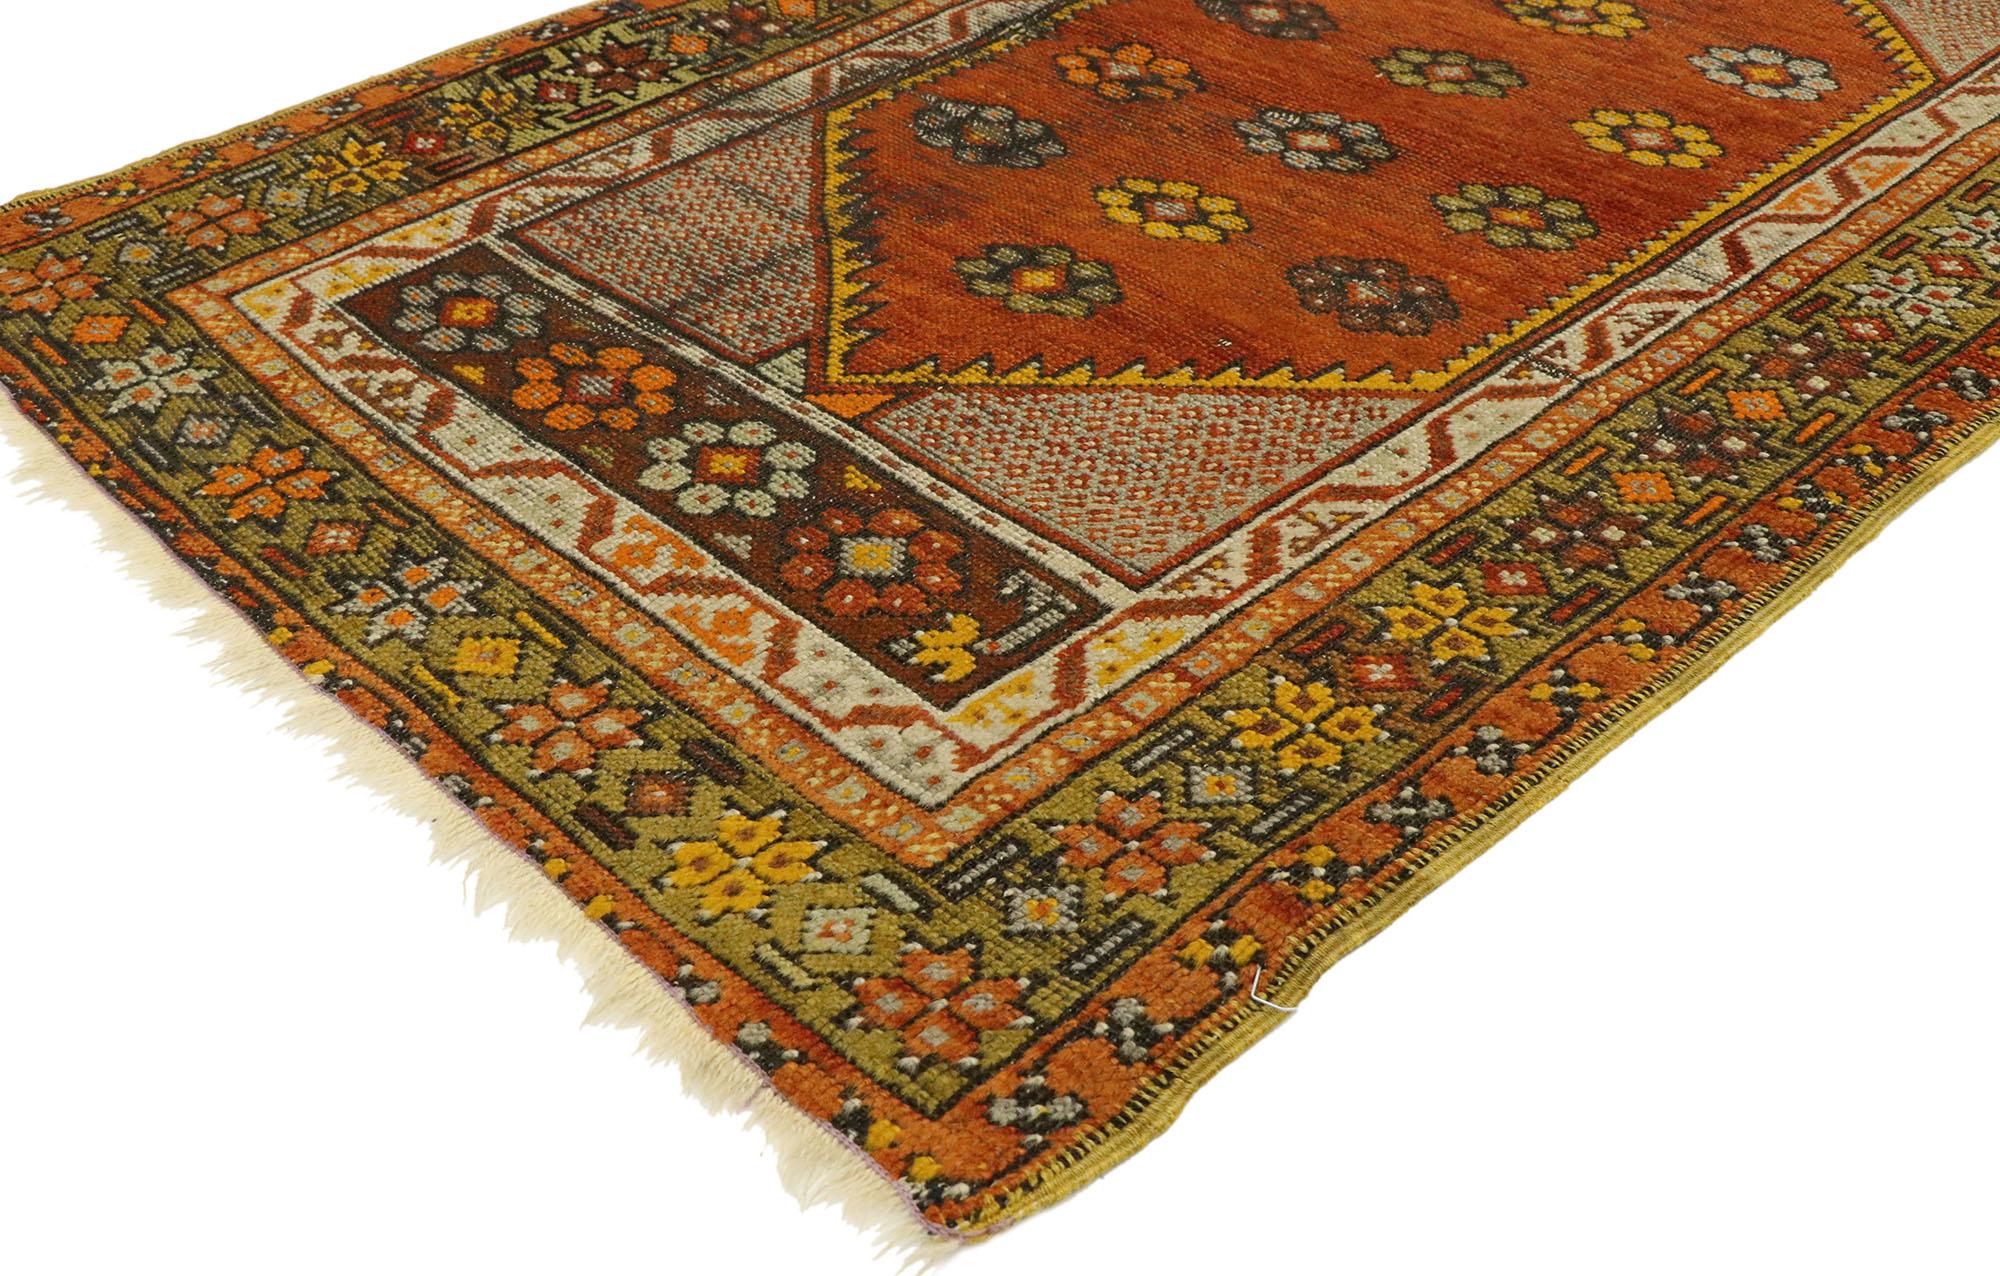 70866 Vintage Turkish Oushak Rug, 03'00 X 04'06. The hand-knotted wool vintage Turkish Oushak rug seamlessly blends rustic warmth with the whimsical curves of Art Nouveau. Its aged backdrop provides the perfect canvas for an enchanting design,